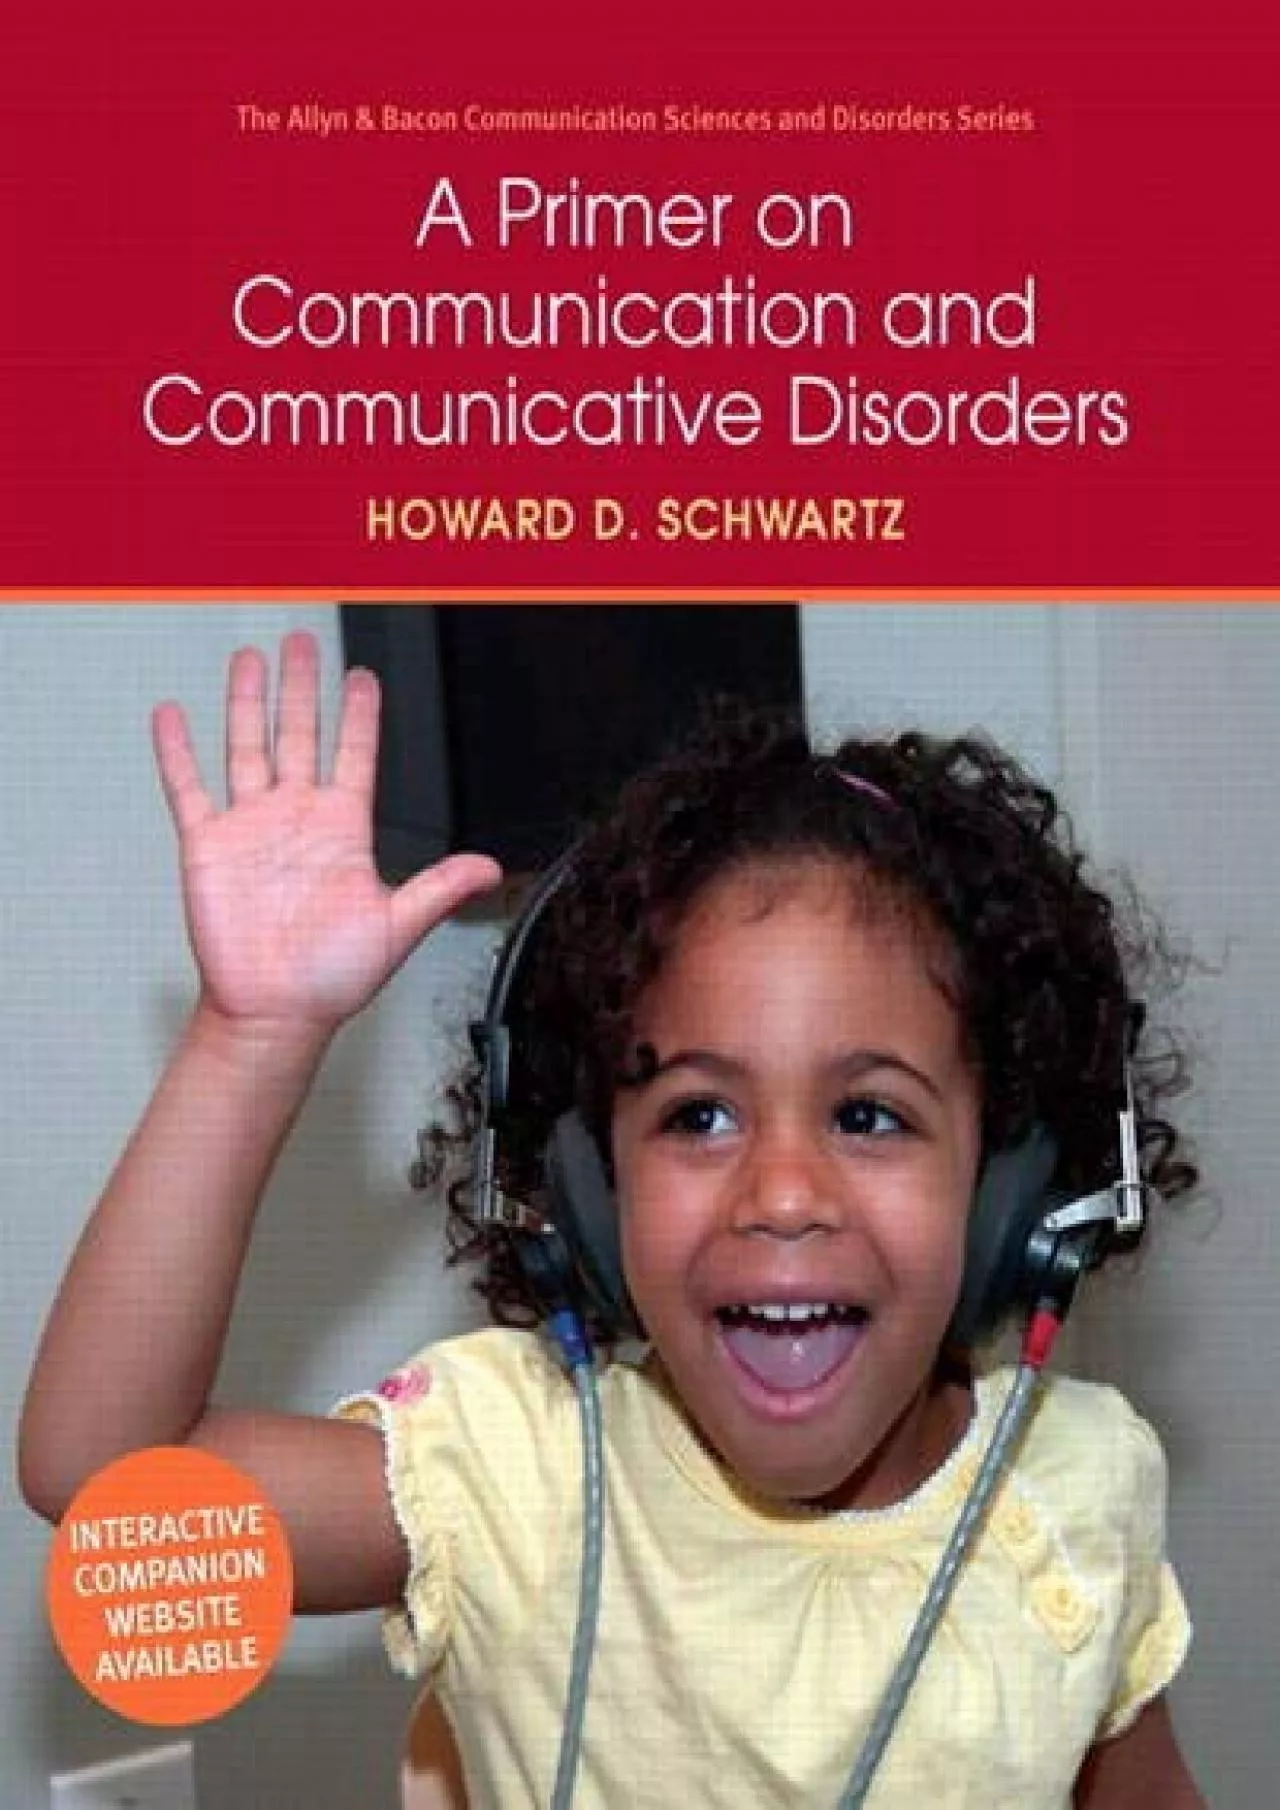 (BOOS)-A Primer on Communication and Communicative Disorders (Allyn & Bacon Communication